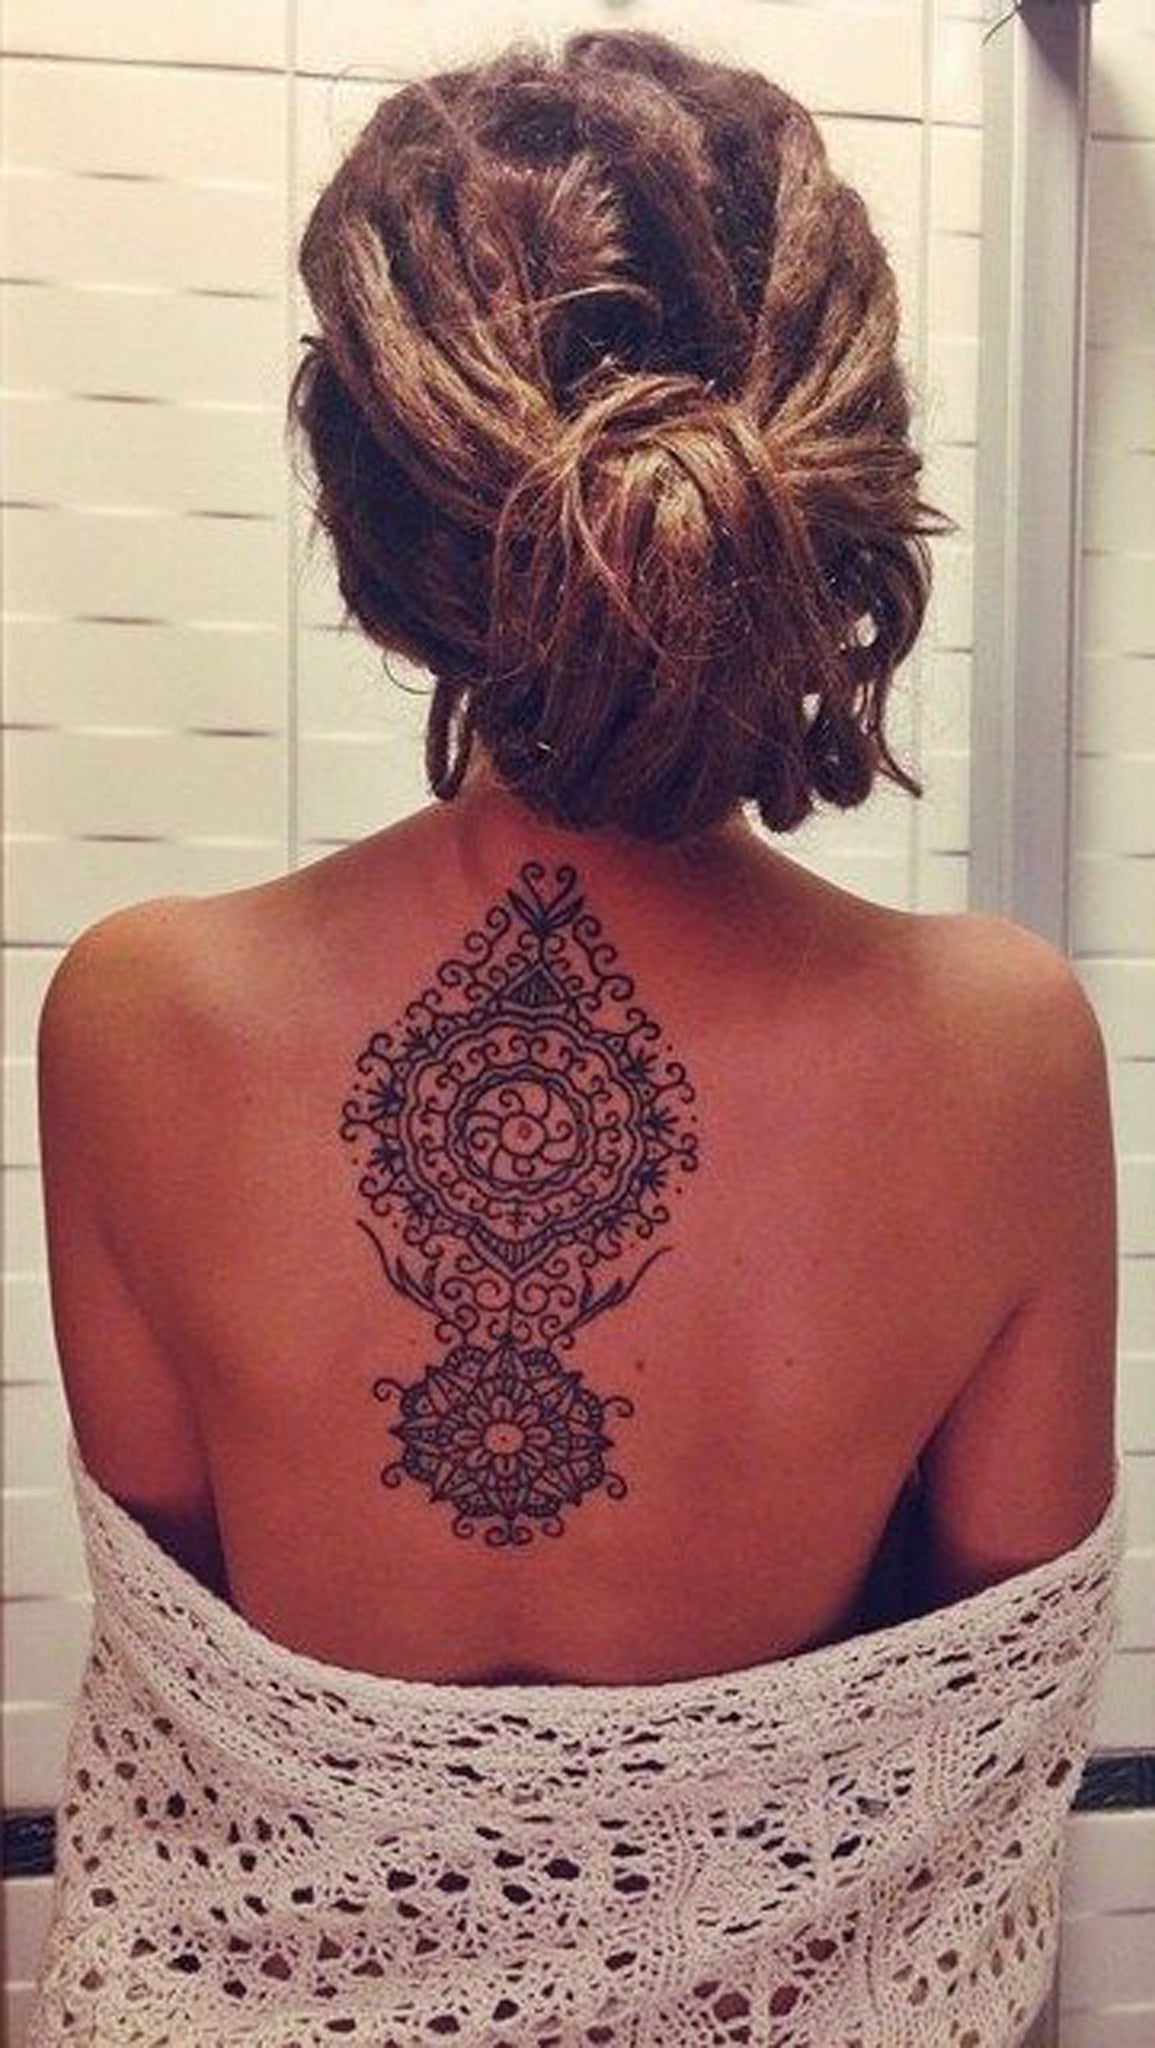 Inspirational Quote Back Tattoos | Flashbacks and Echo